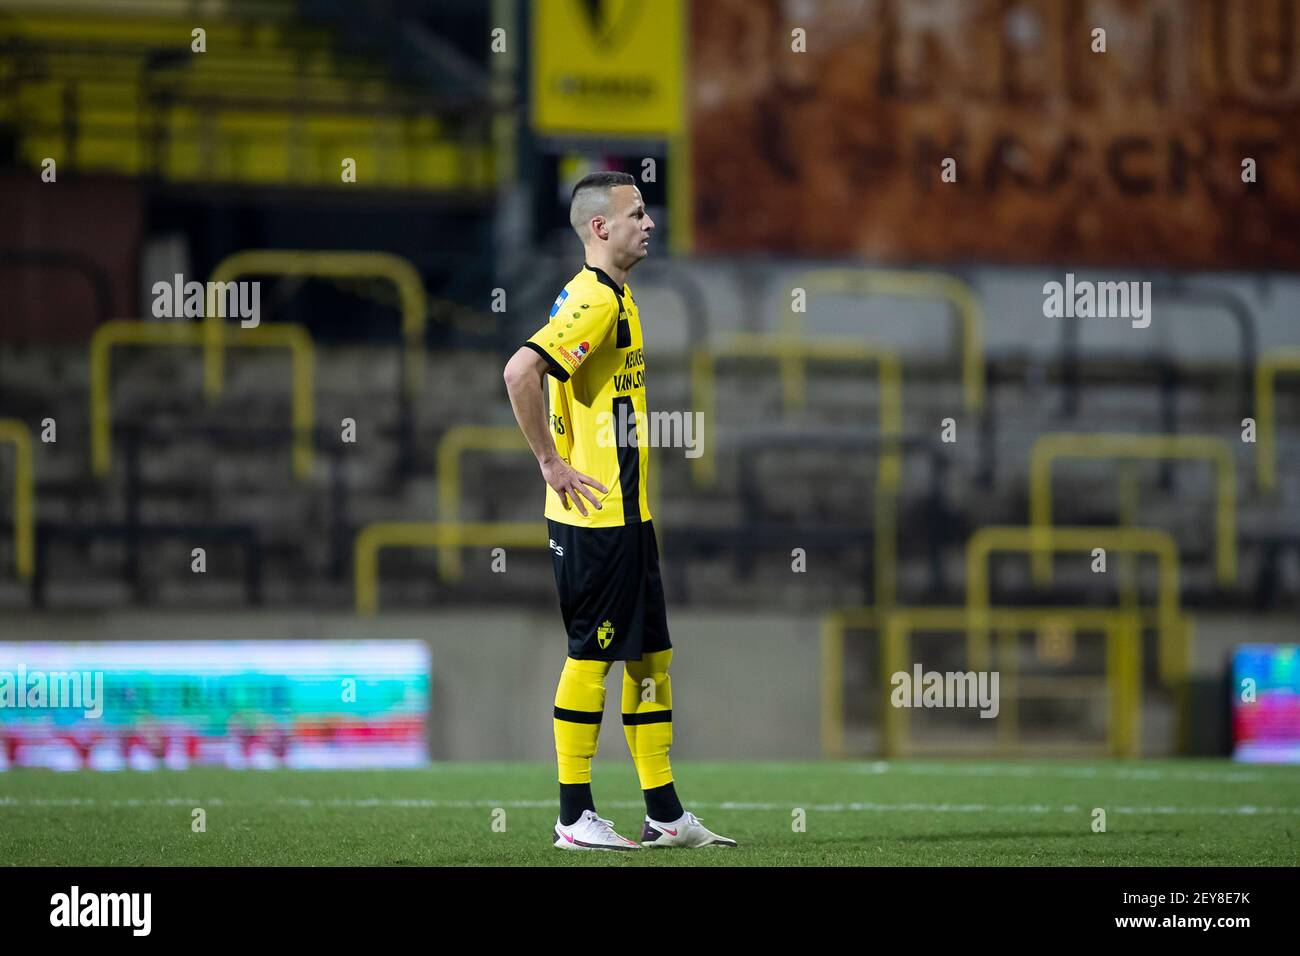 Lierse's Ben Santermans pictured after a soccer match between Lierse Kempenzonen and Union Saint-Gilloise, Friday 05 March 2021 in Lier, on day 22 of Stock Photo